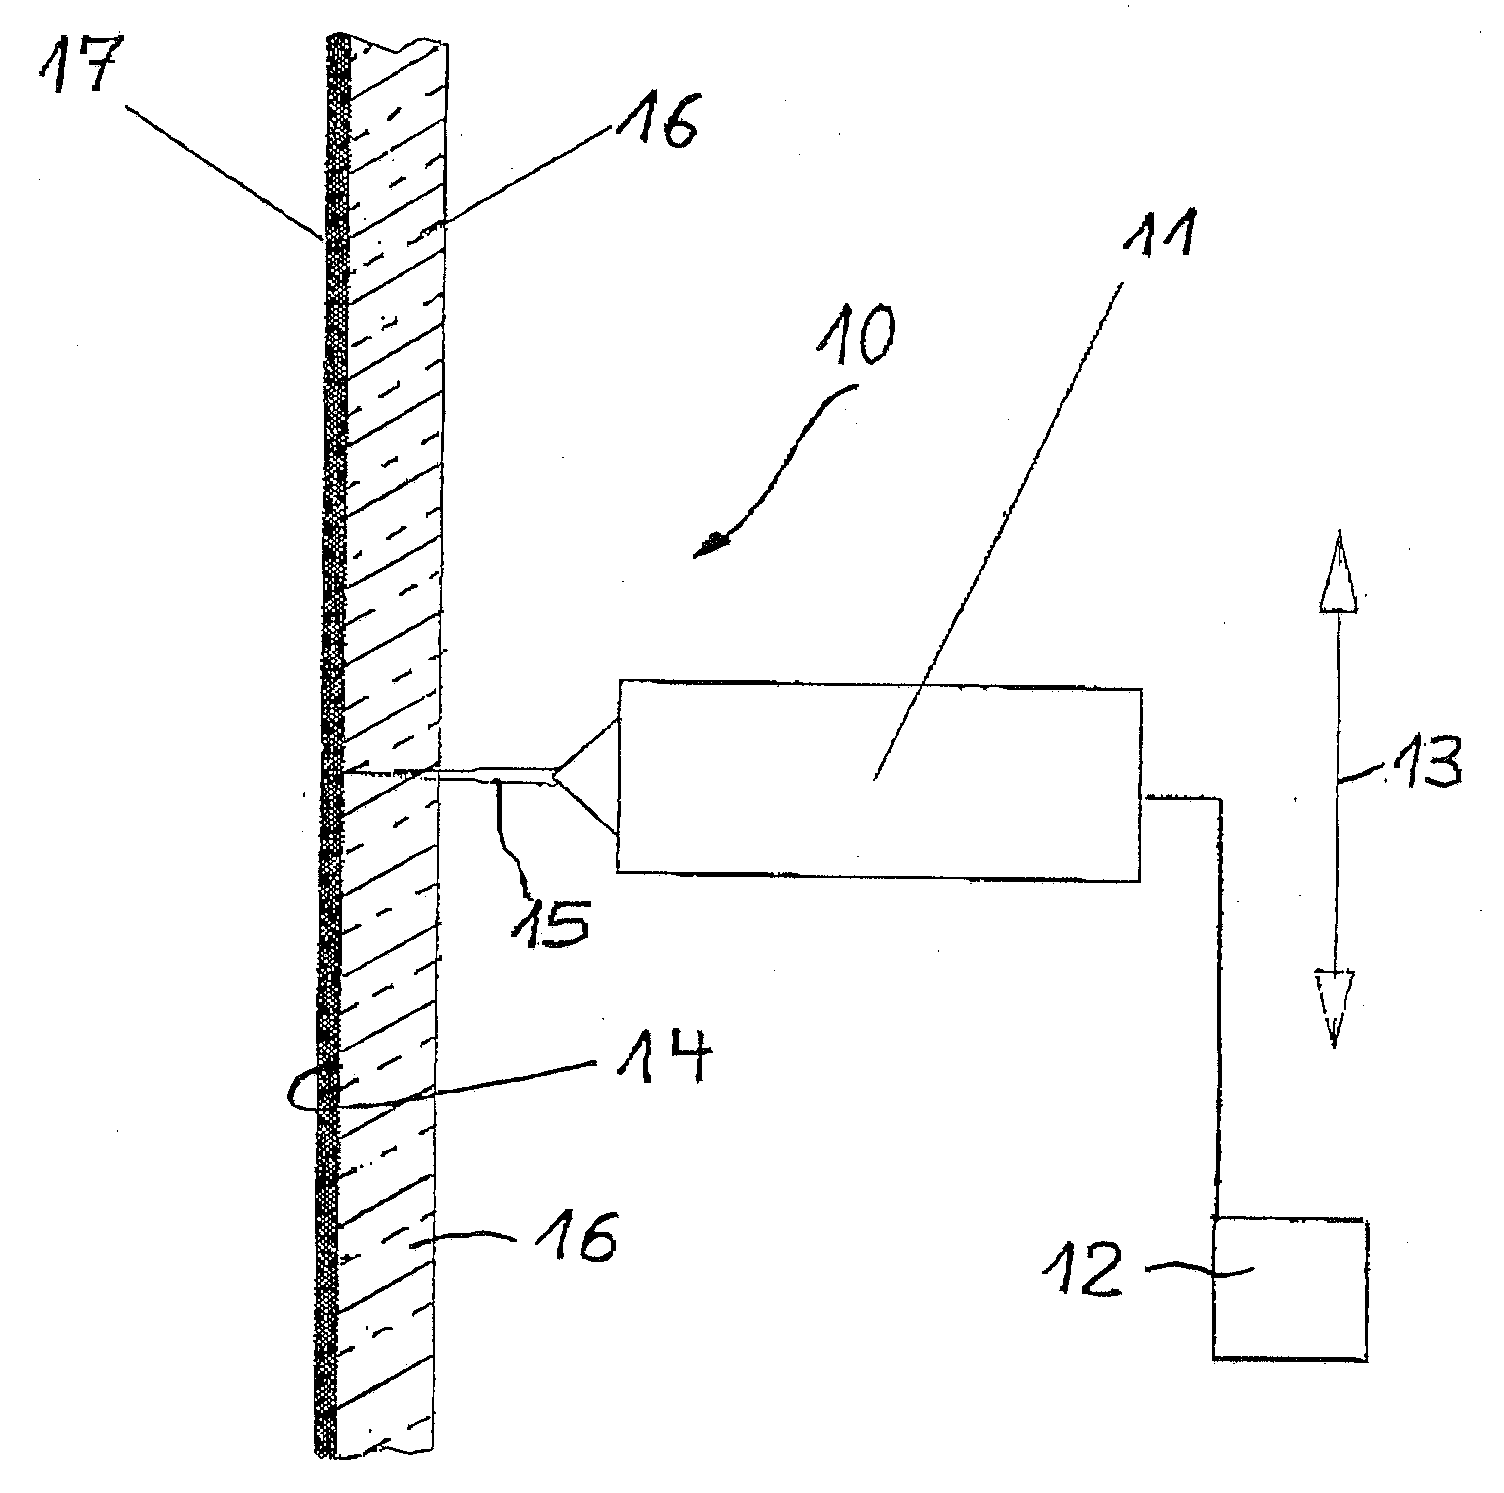 Method for generating color information, such as motifs, on a substrate made of glass in particular